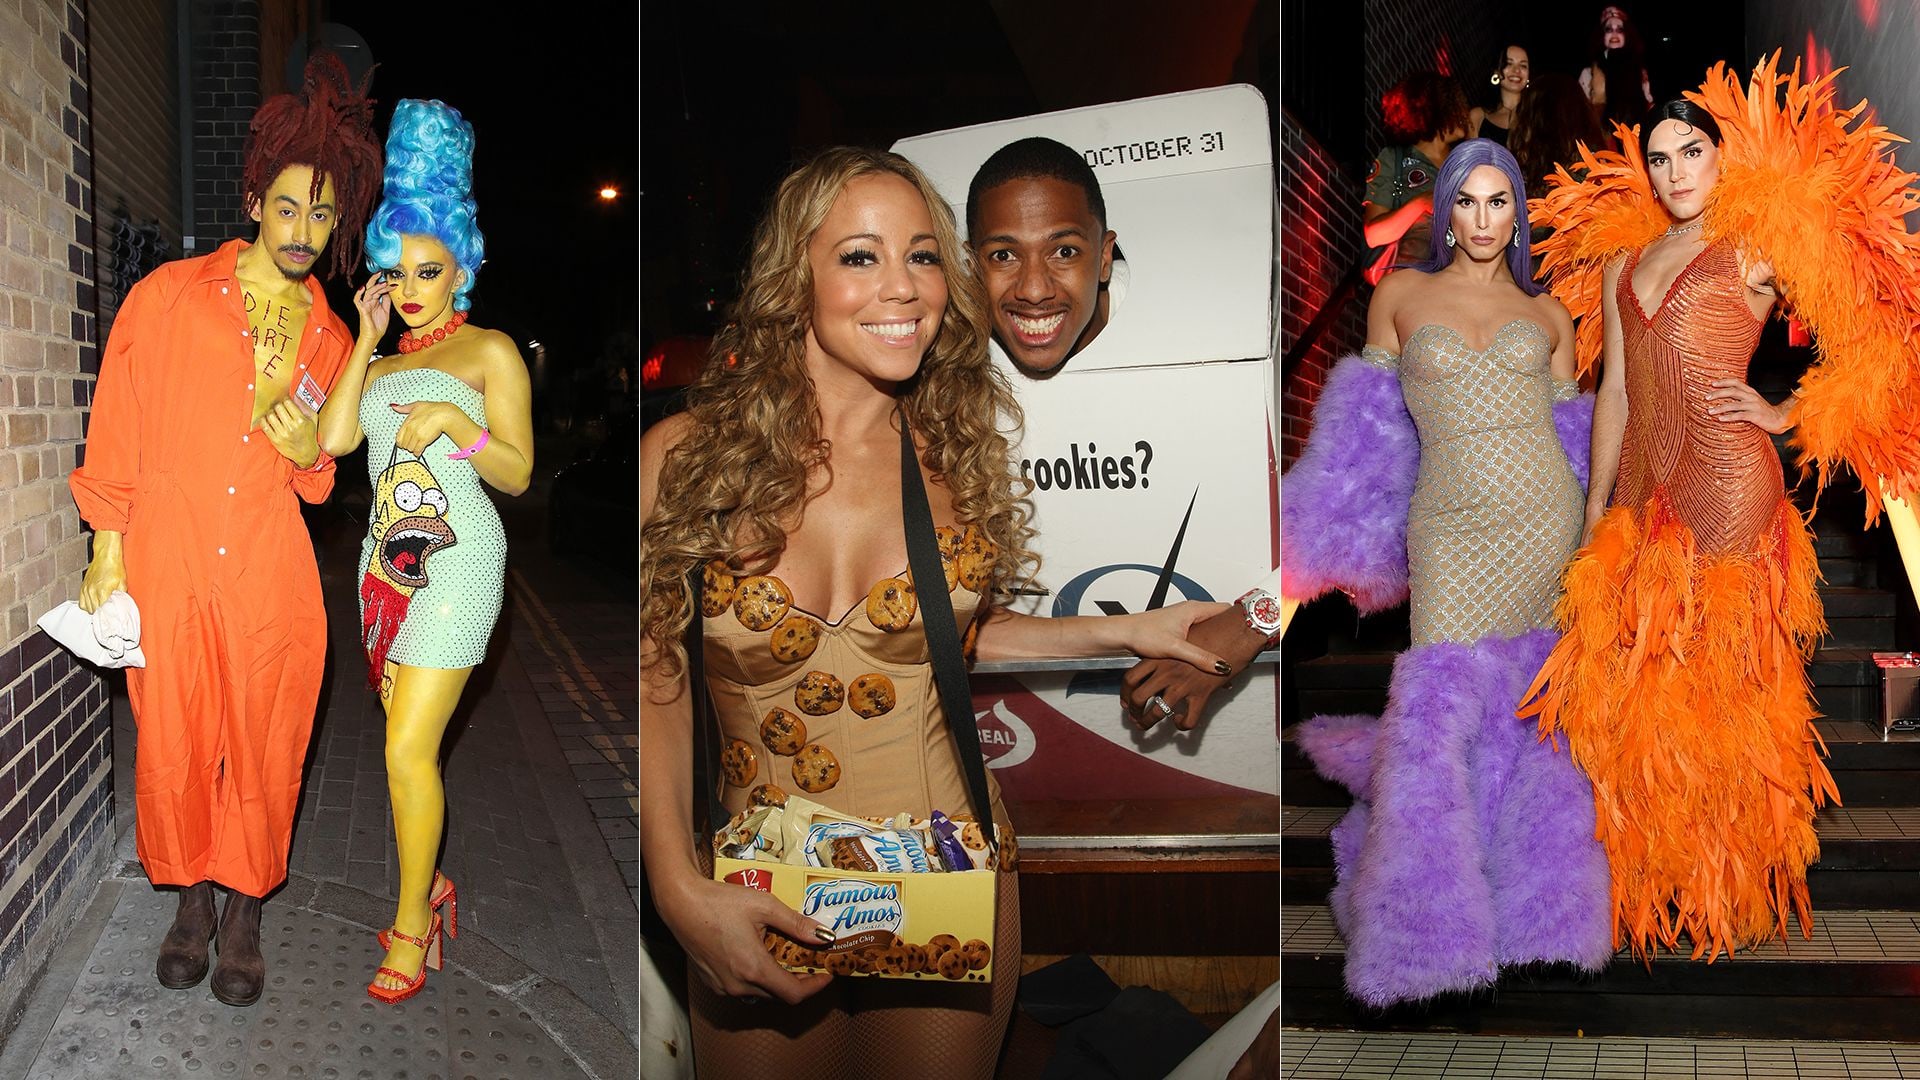 20 of the most inspired celebrity couple Halloween costumes